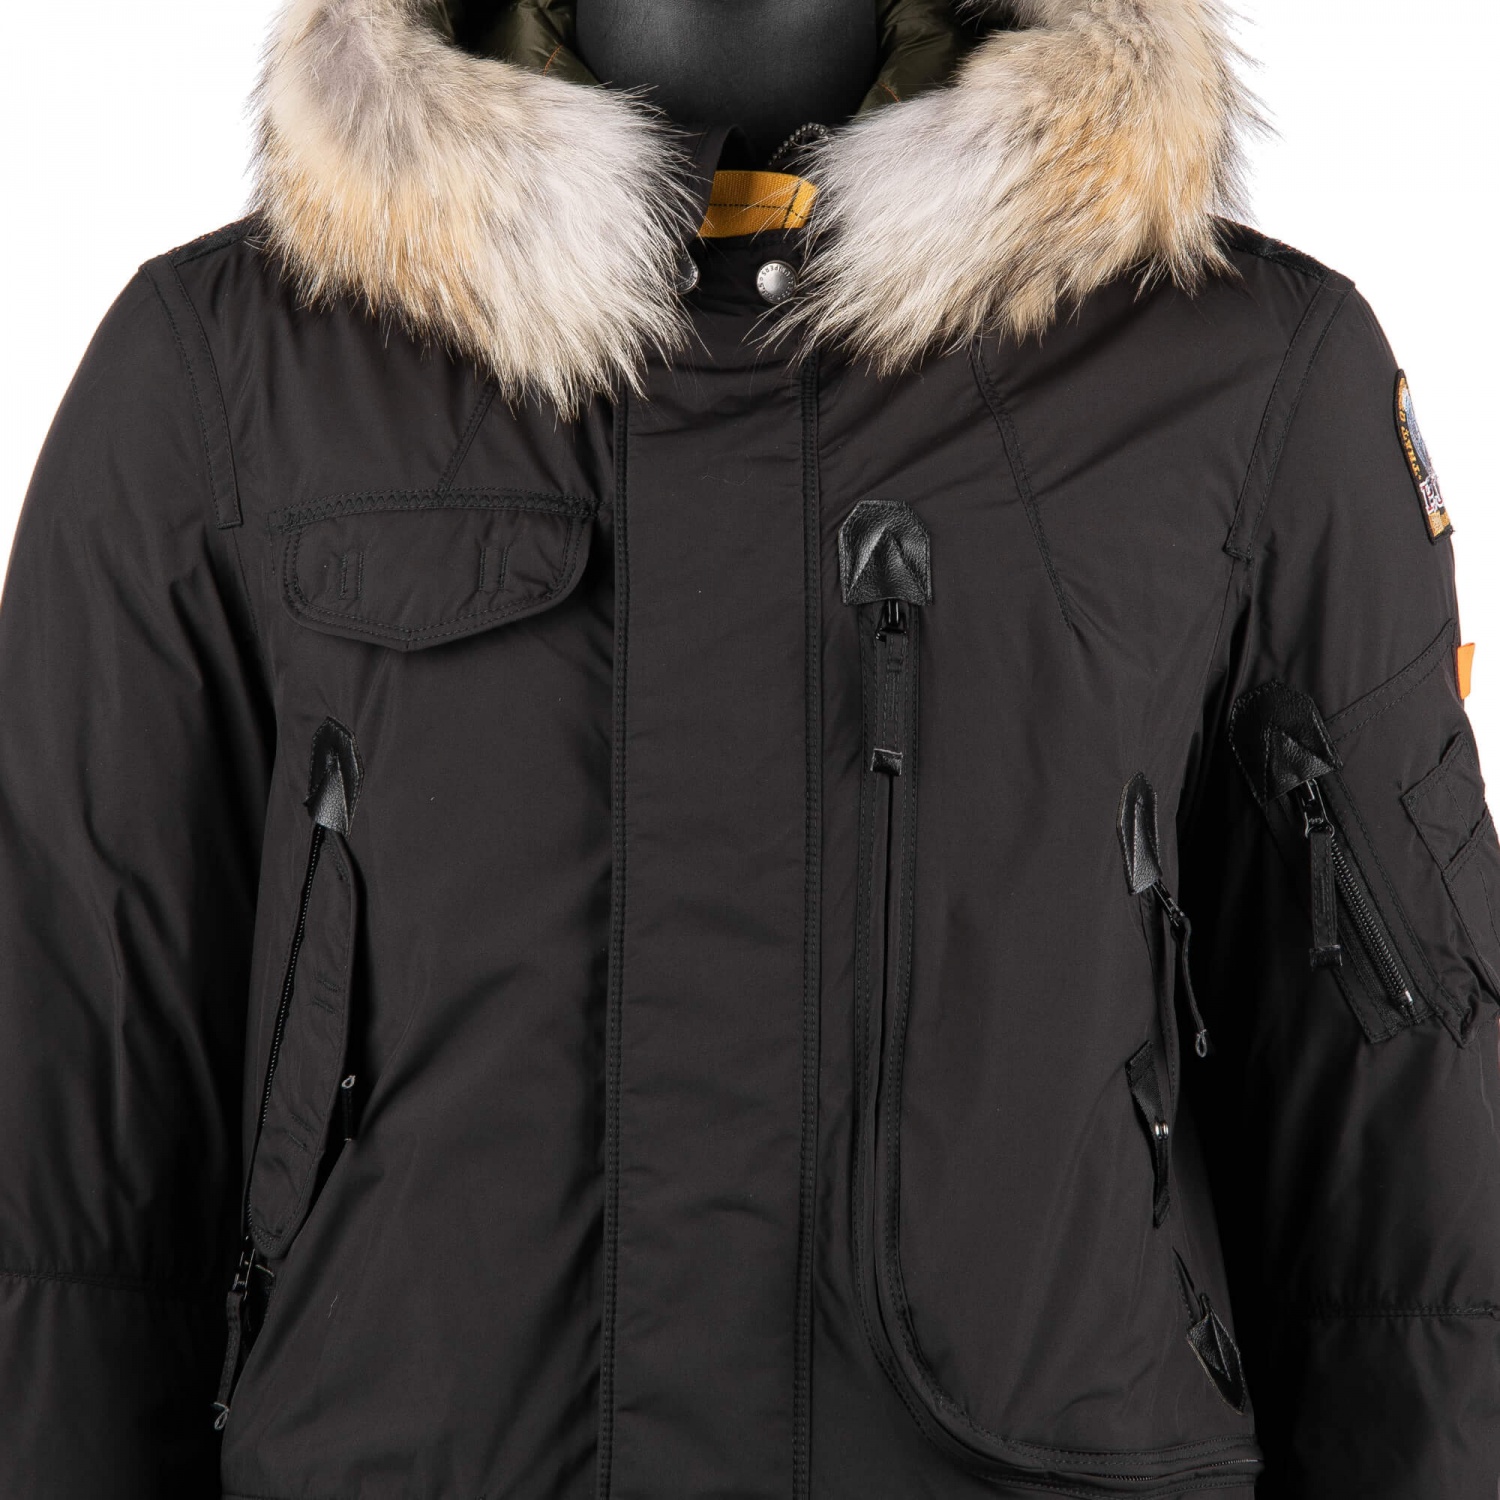 PARAJUMPERS Parka Down Jacket RIGHT HAND LIGHT with Fur Hood Raven ...